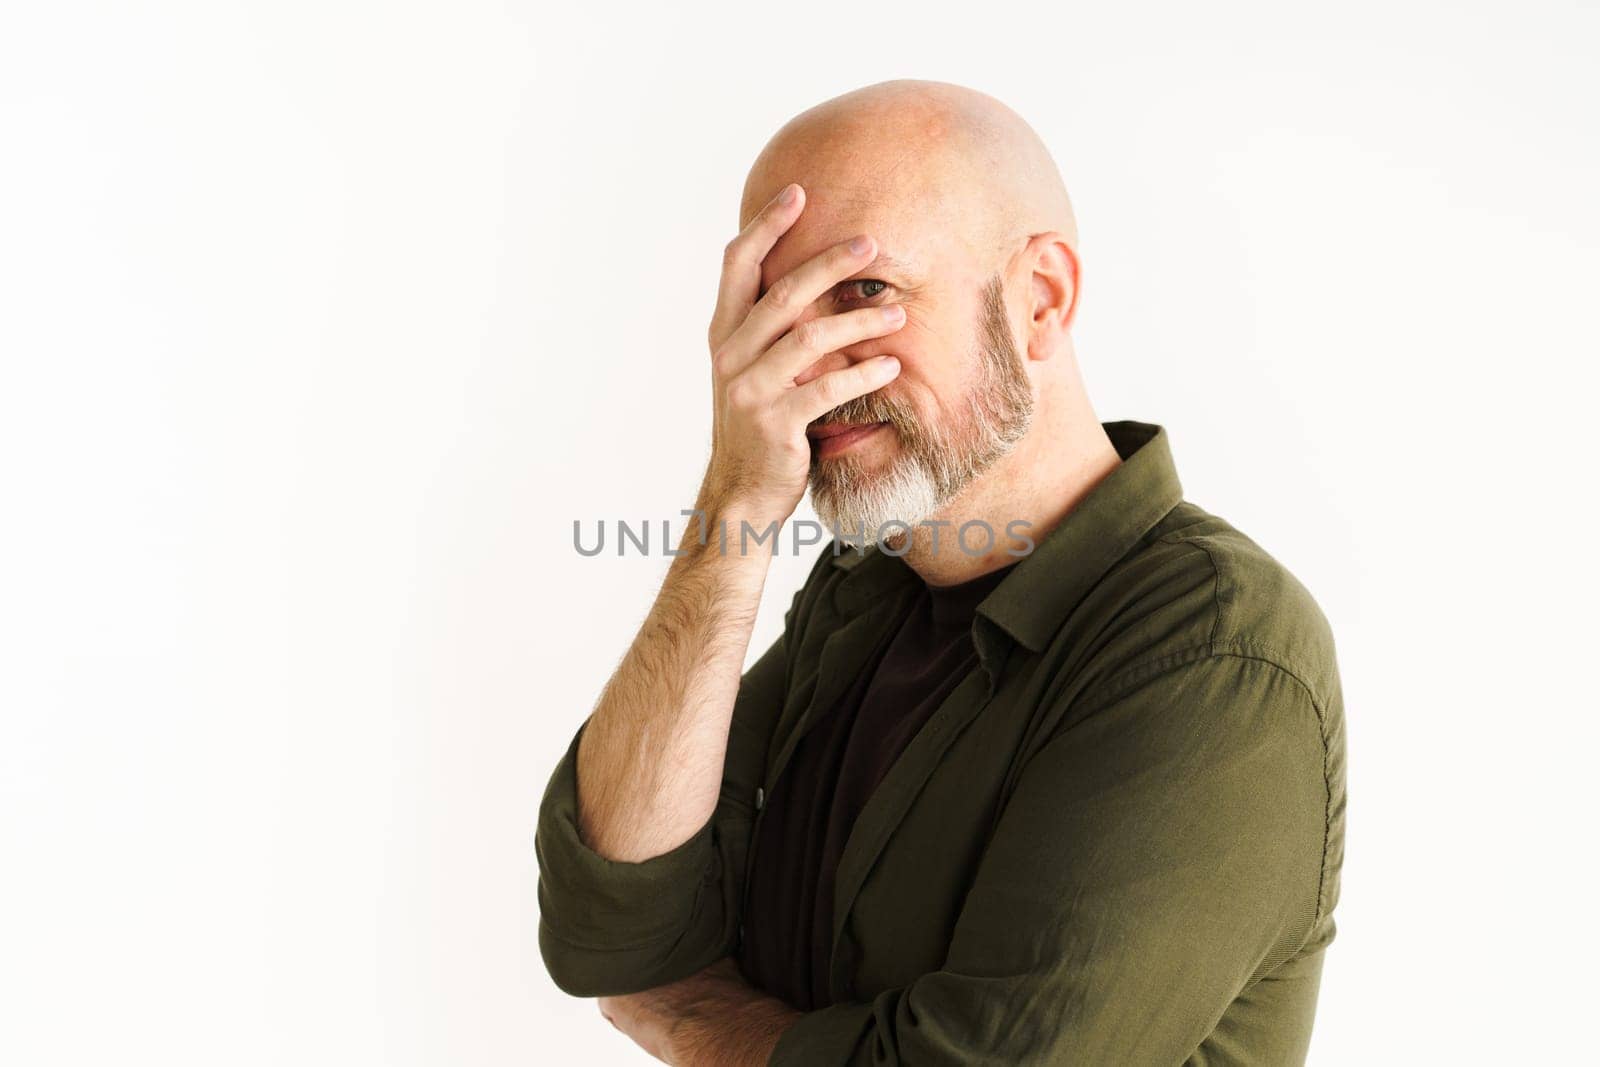 Mature man with silver beard in moment of frustration or disbelief. He puts hand on face in facepalm gesture, conveying sense of sarcasm and exasperation. White background adds emphasis to reaction. High quality photo